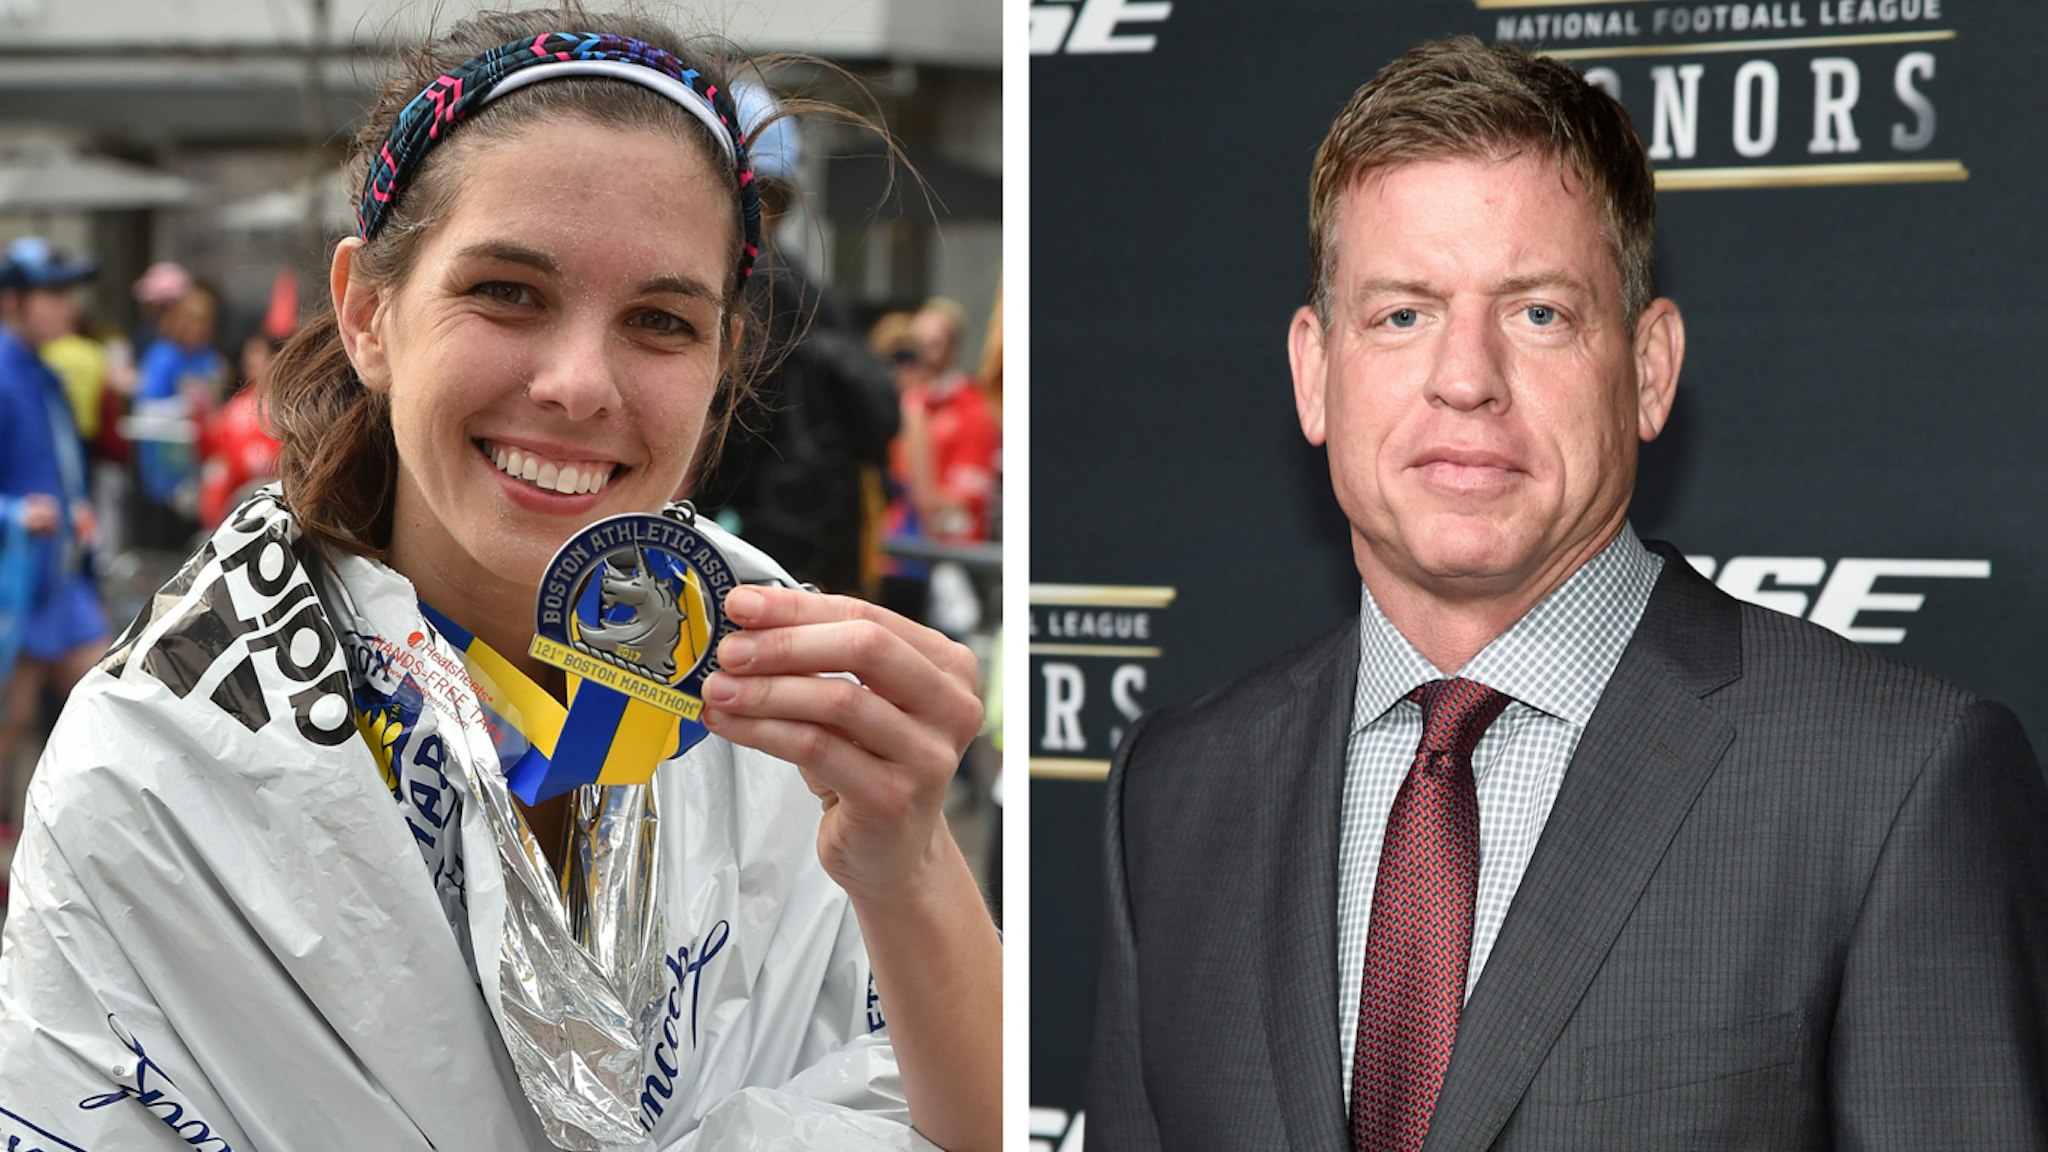 Meghan Ottolini holds her medal after completing the 121st Boston Marathon in Boston on Monday, April 17, 2017. Staff photo by Christopher Evans Former NFL player Troy Aikman attends the 5th annual NFL Honors at Bill Graham Civic Auditorium on February 6, 2016 in San Francisco, California.